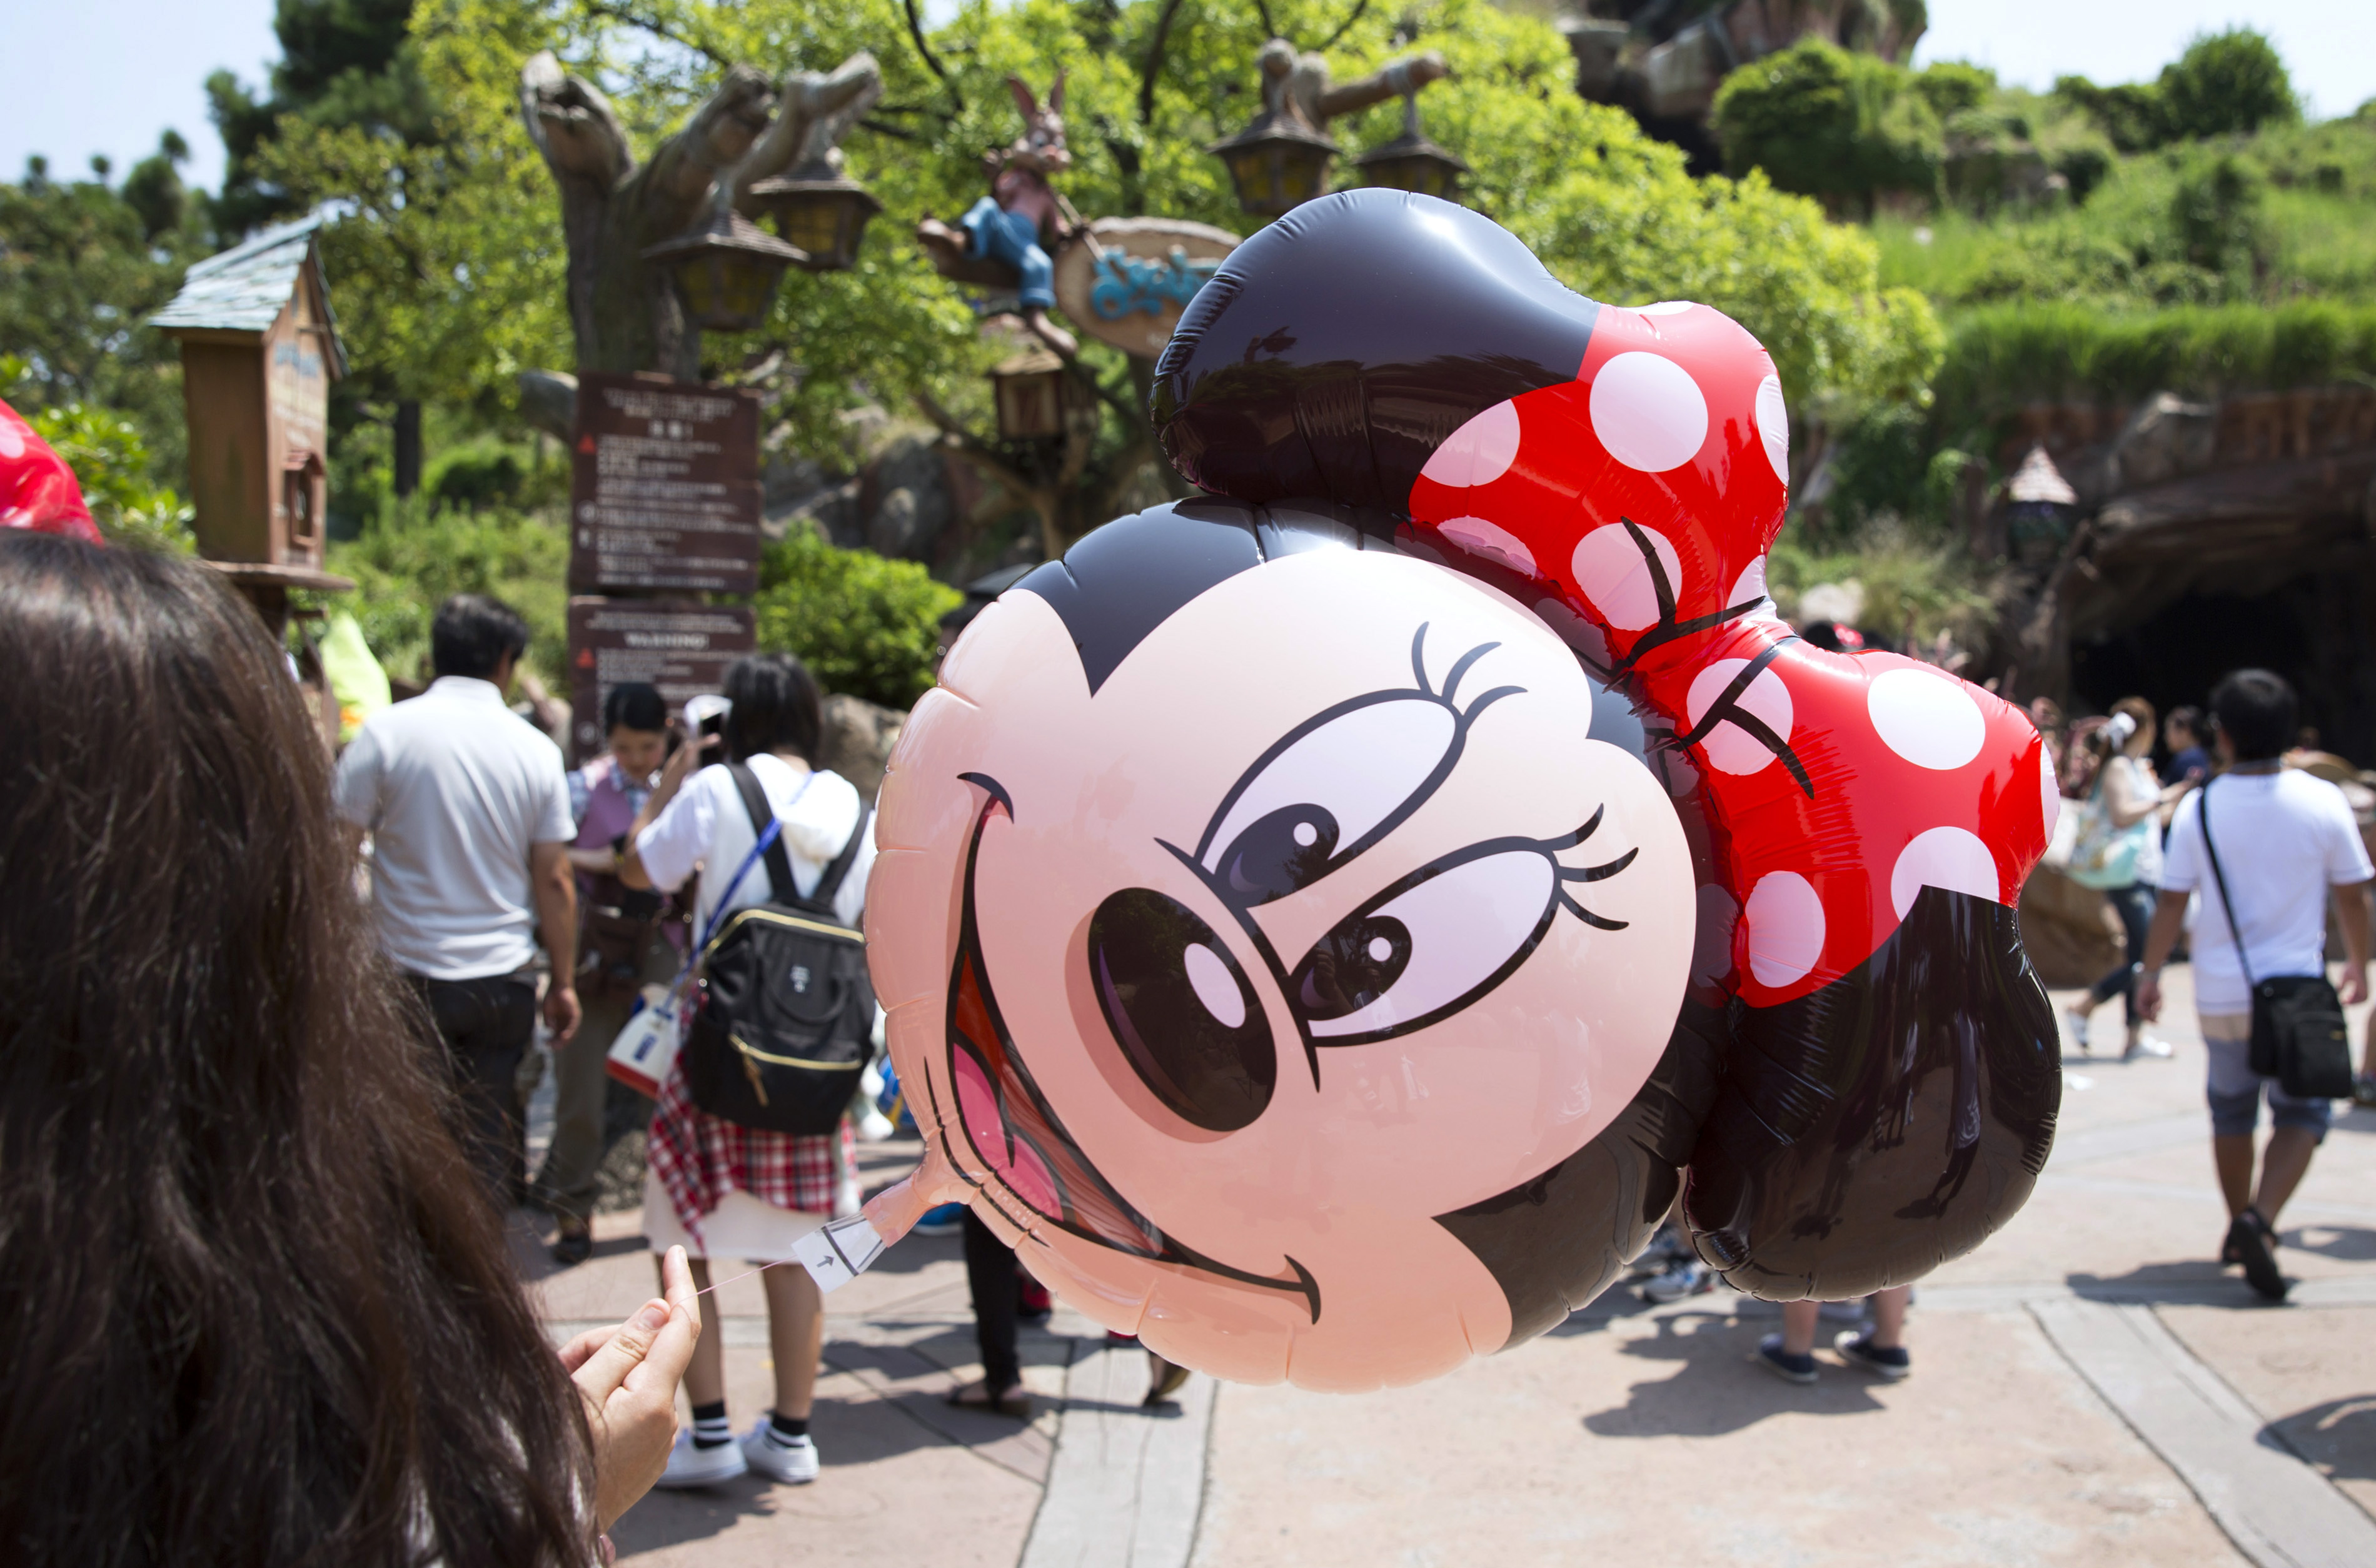 Shanghai Disney draws 4 million guests, expects break-even in 2017